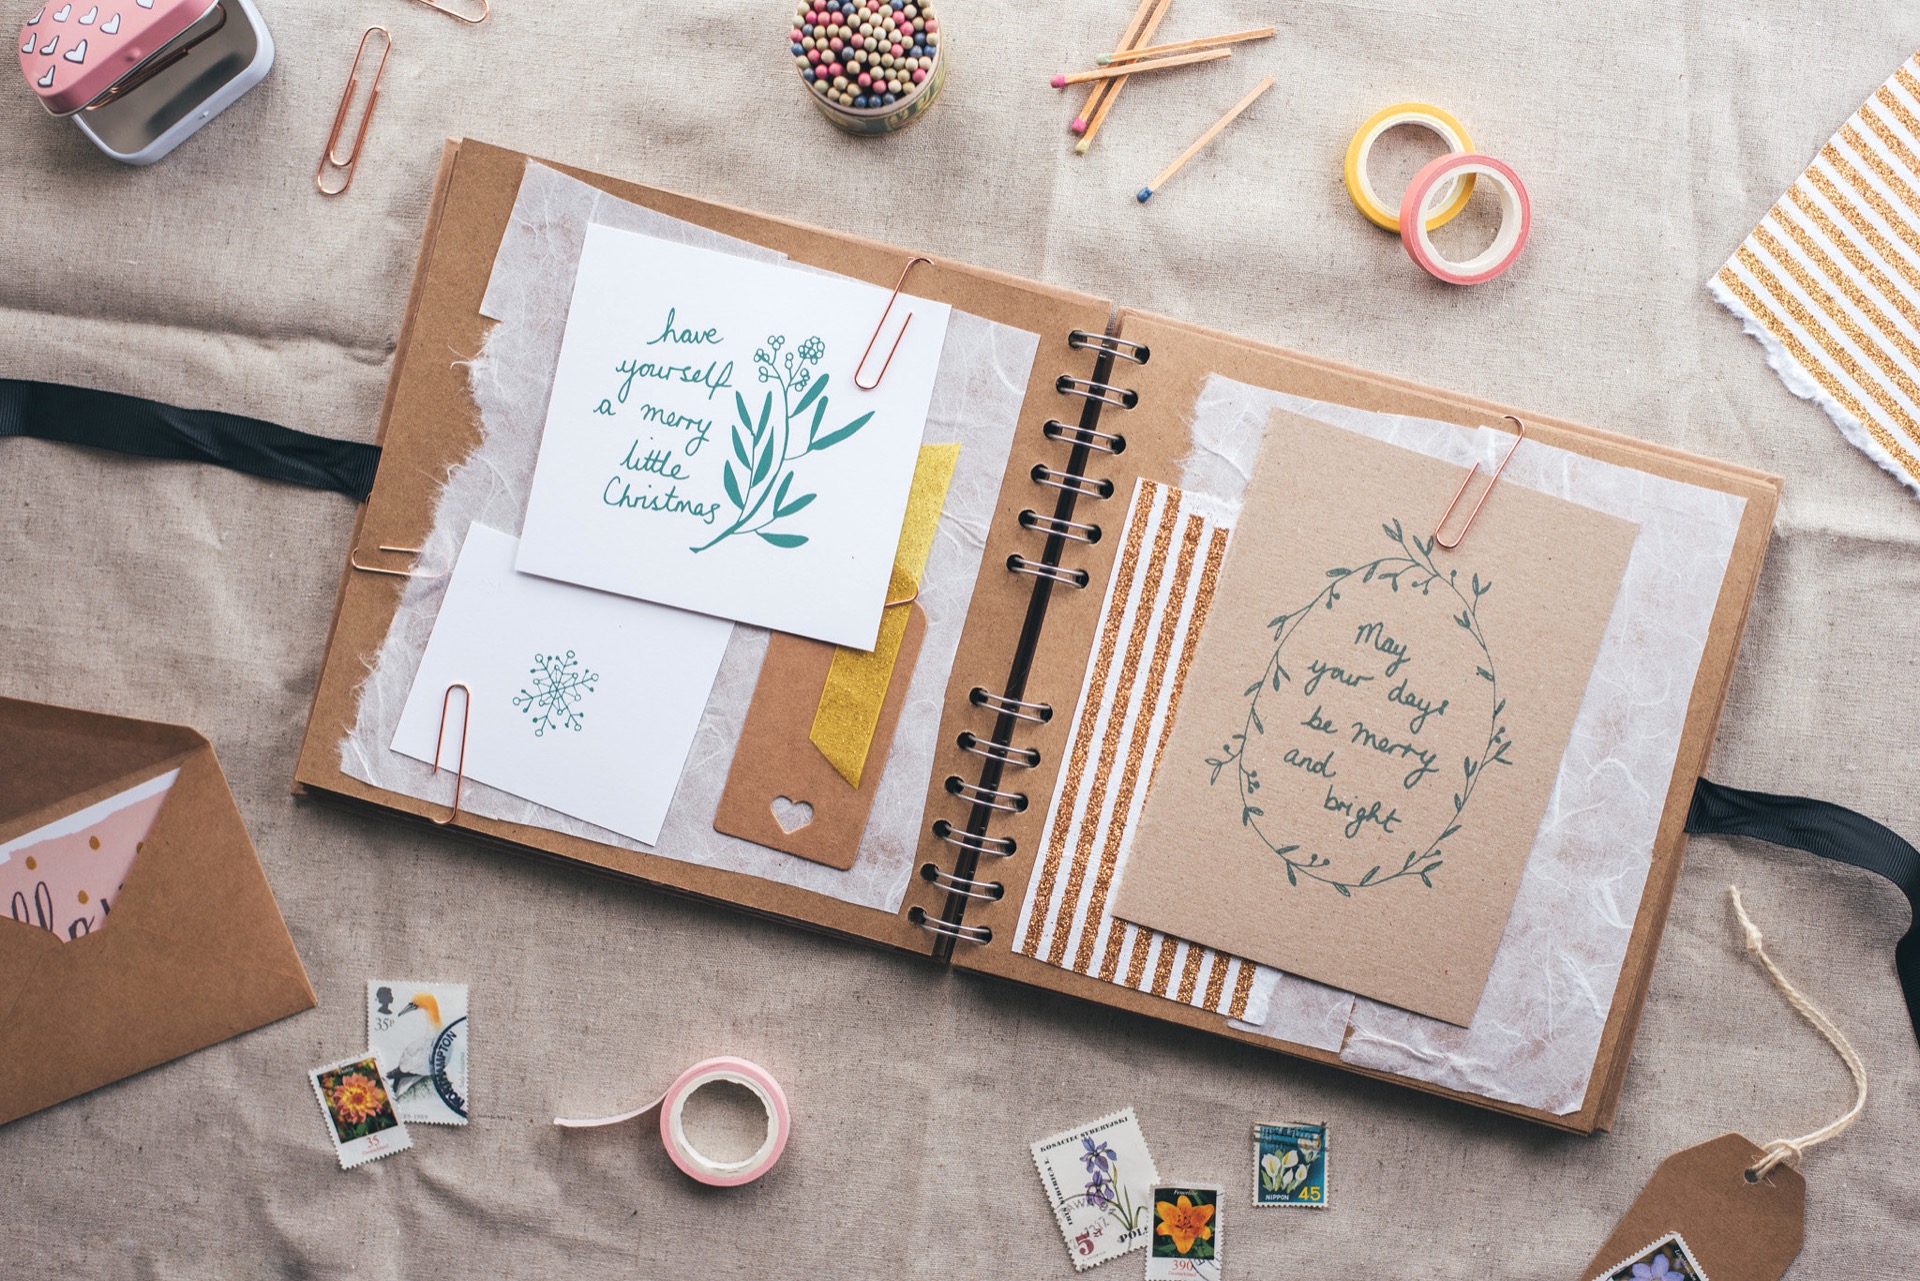 an ideas notebook filled with ideas for creating a small business brand identity